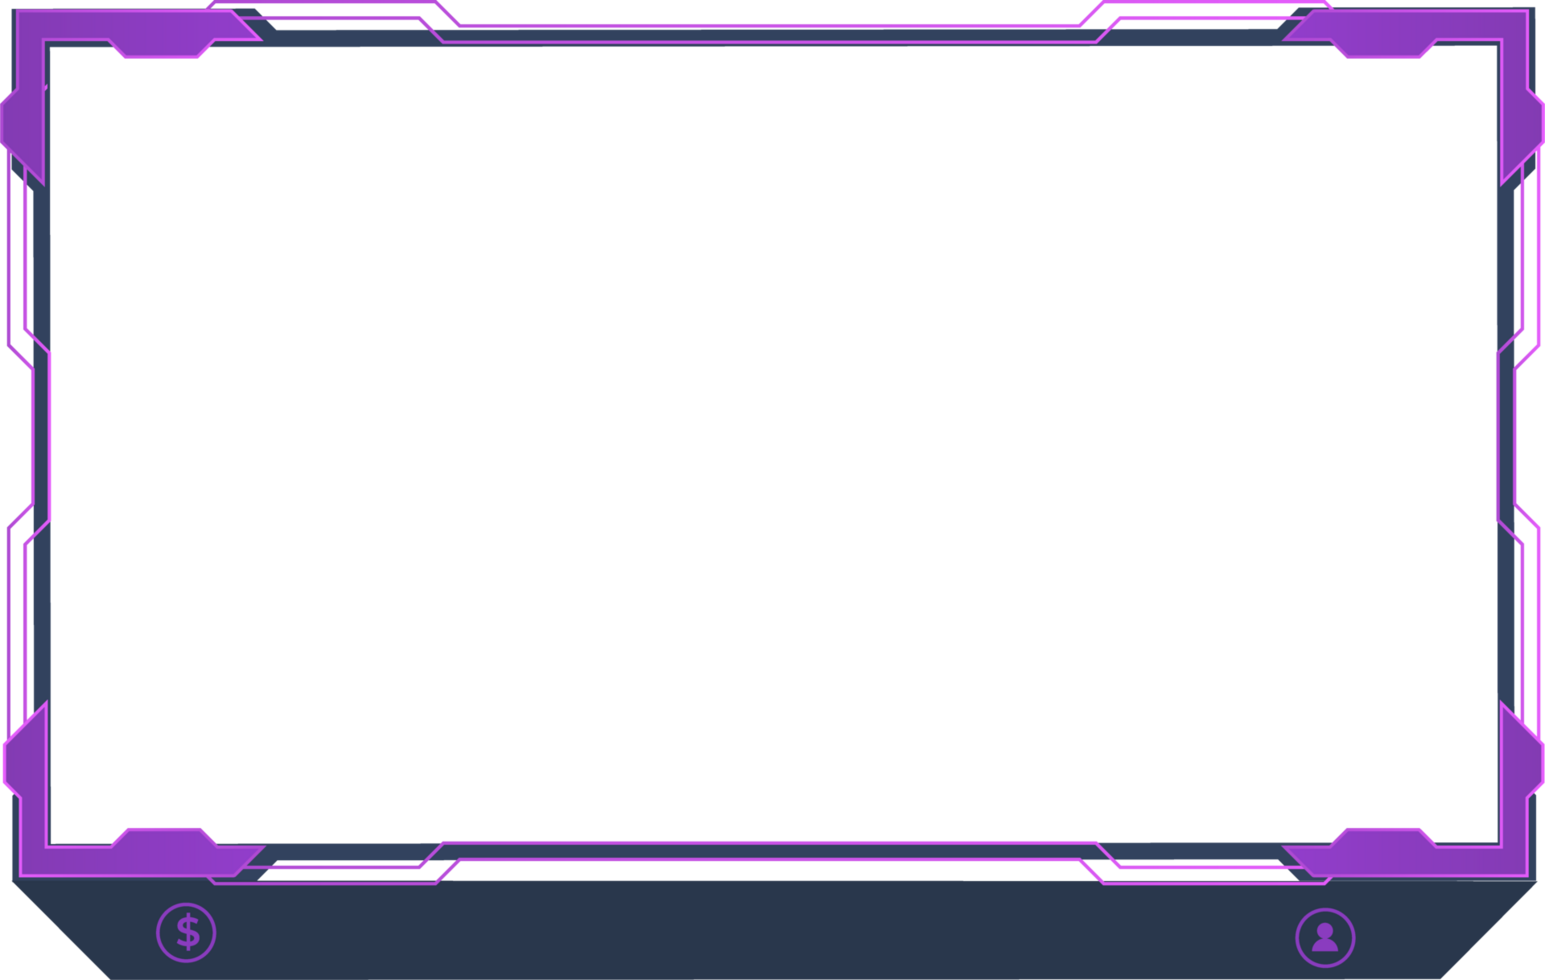 Futuristic gamer screen interface decoration with abstract shapes and purple colors. Modern live-streaming border frame design with subscribe buttons. Special gaming overlay frame png. png